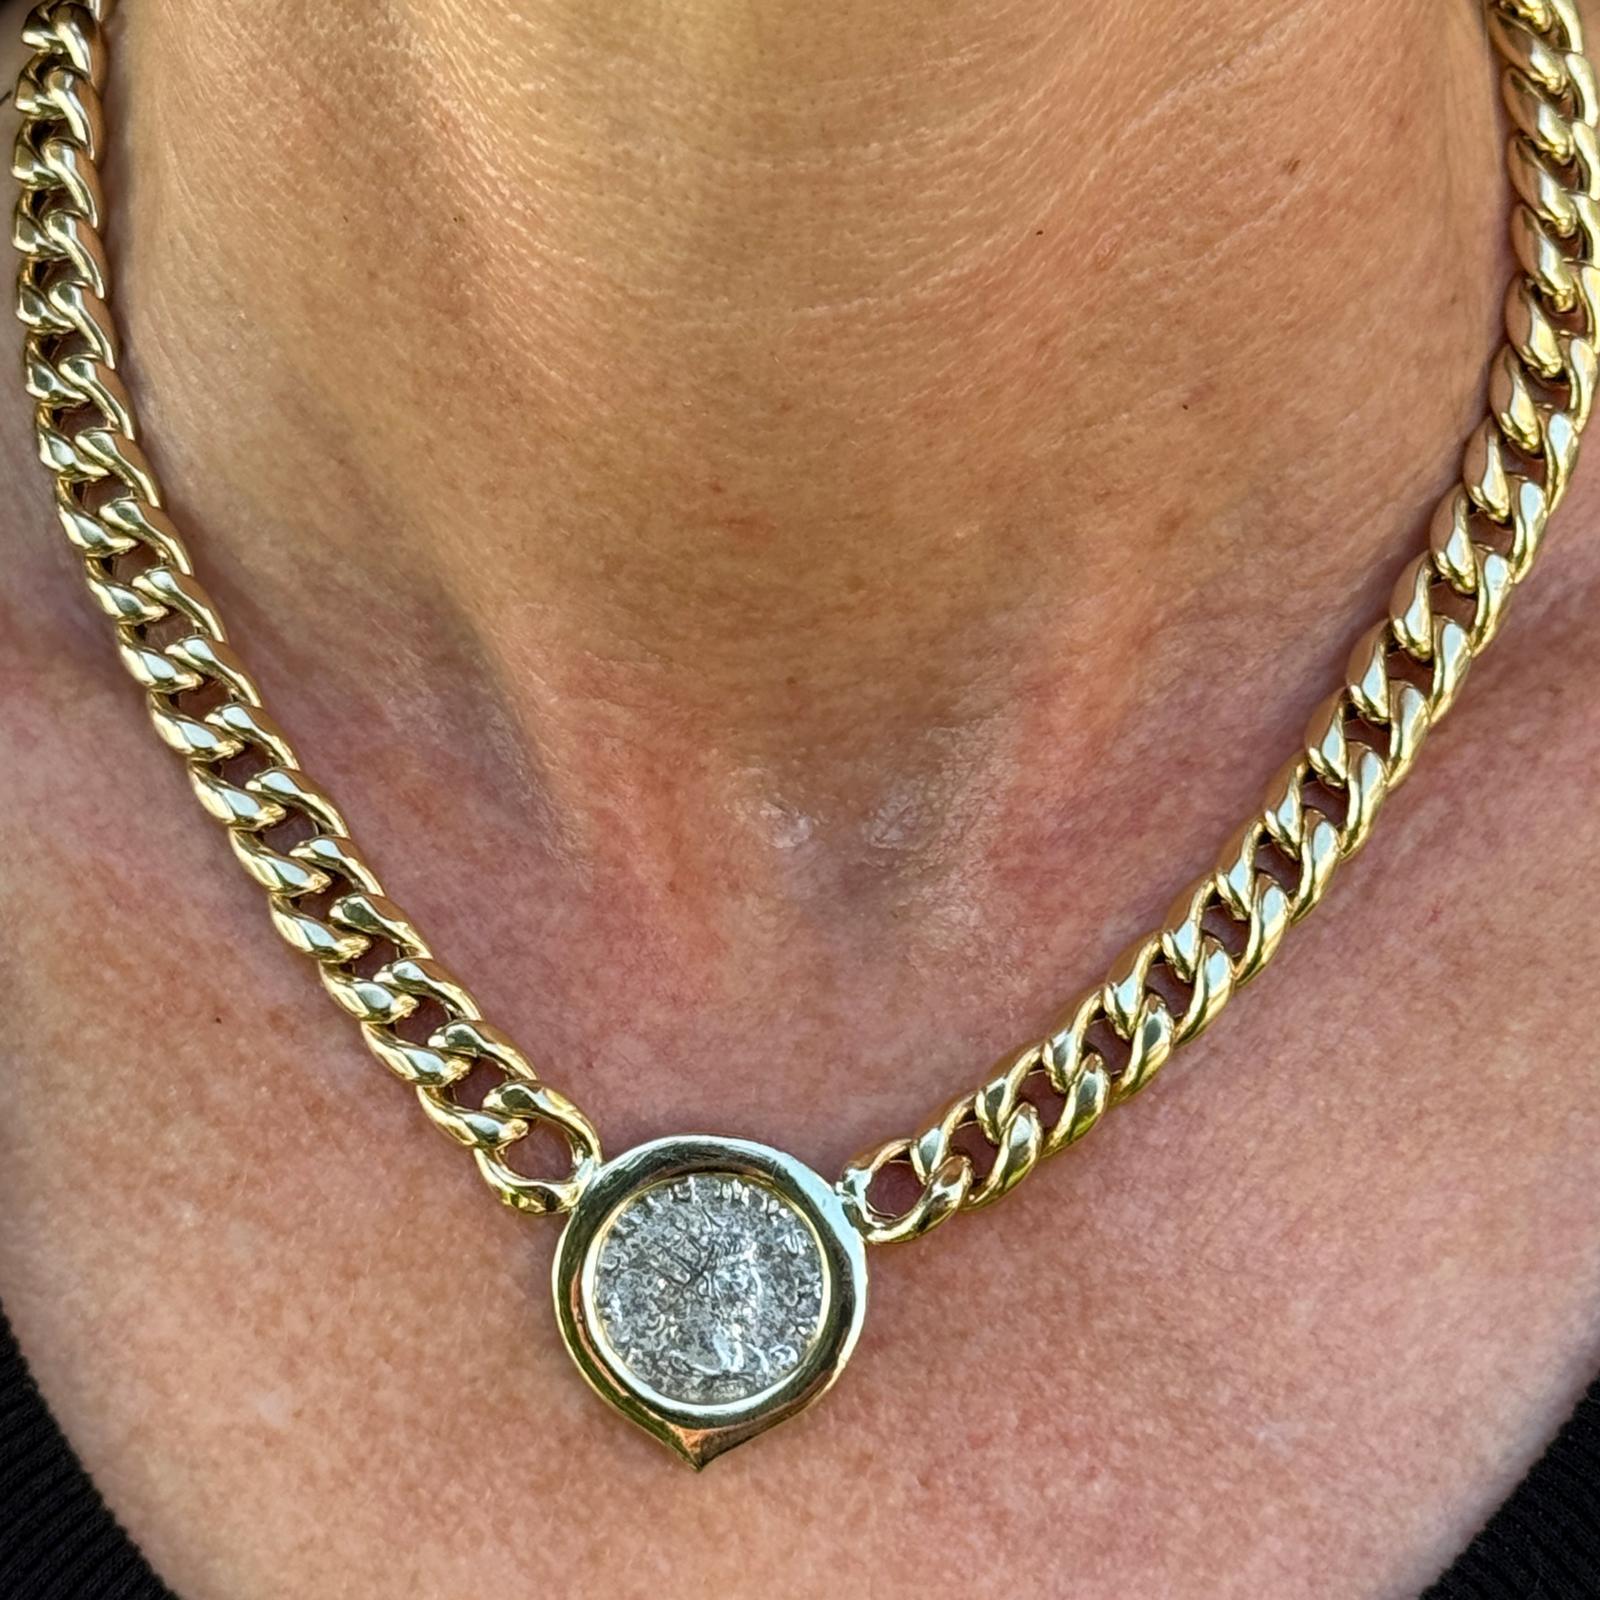 Ancient coin necklace crafted in 14 karat yellow gold. The necklace features an ancient coin set in a gold frame measuring 1.00 in diameter. The cuban link necklace measures 16 inches in length wit box clasp. 
Weight: 45.6 grams.